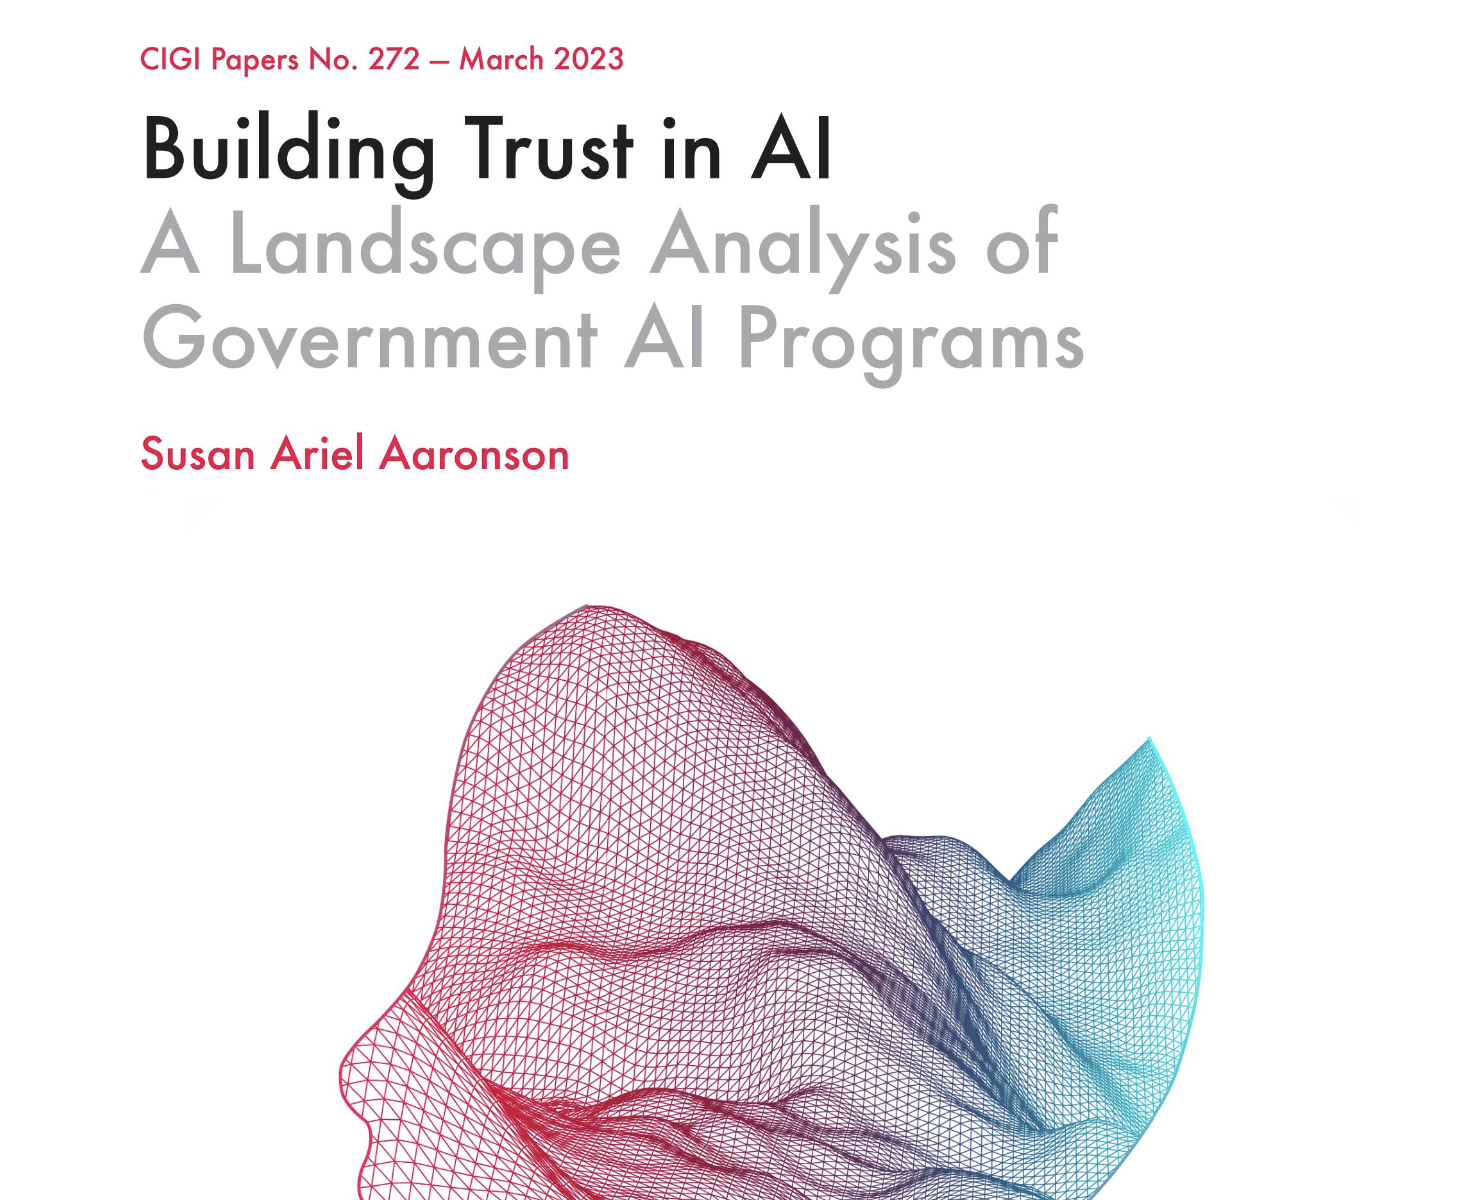 Building Trust in AI: A Landscape Analysis of Government AI Programs